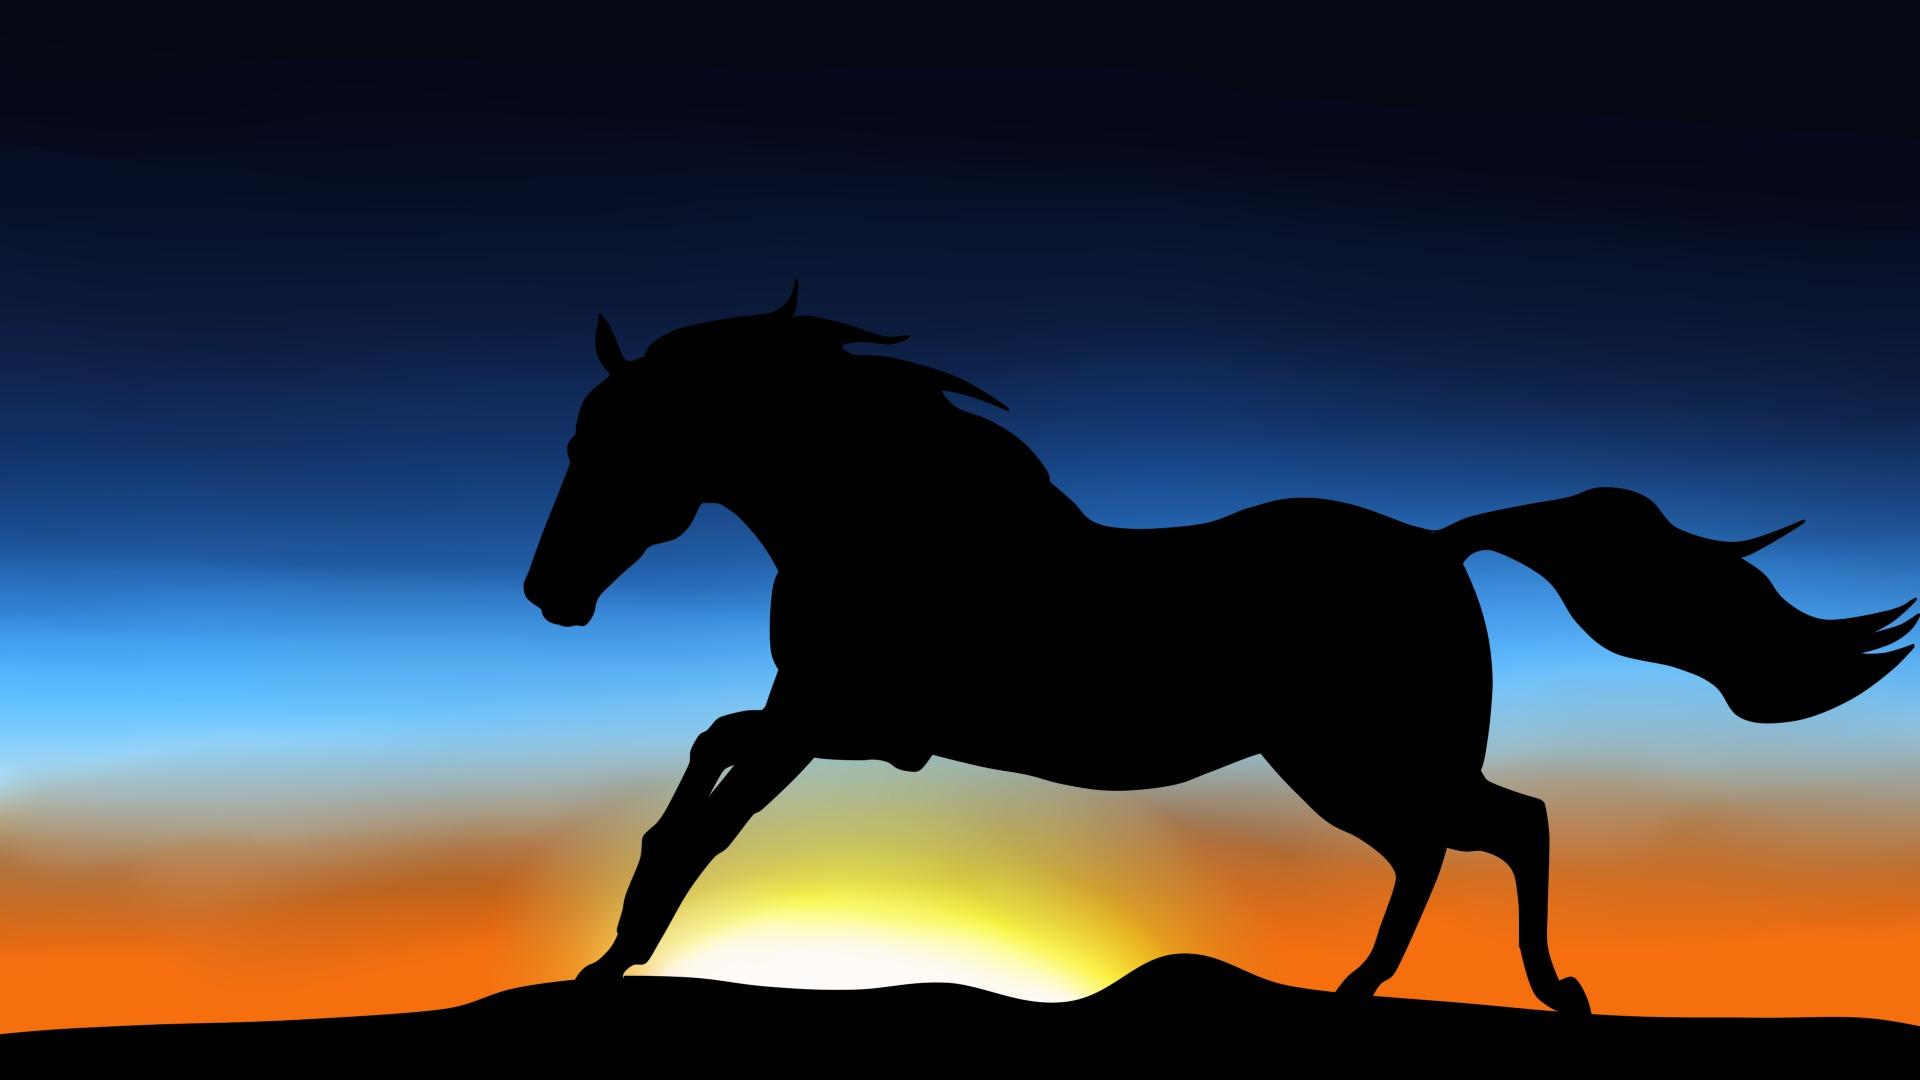 Download Wallpaper animal horse mane jumps tail silhouette sky